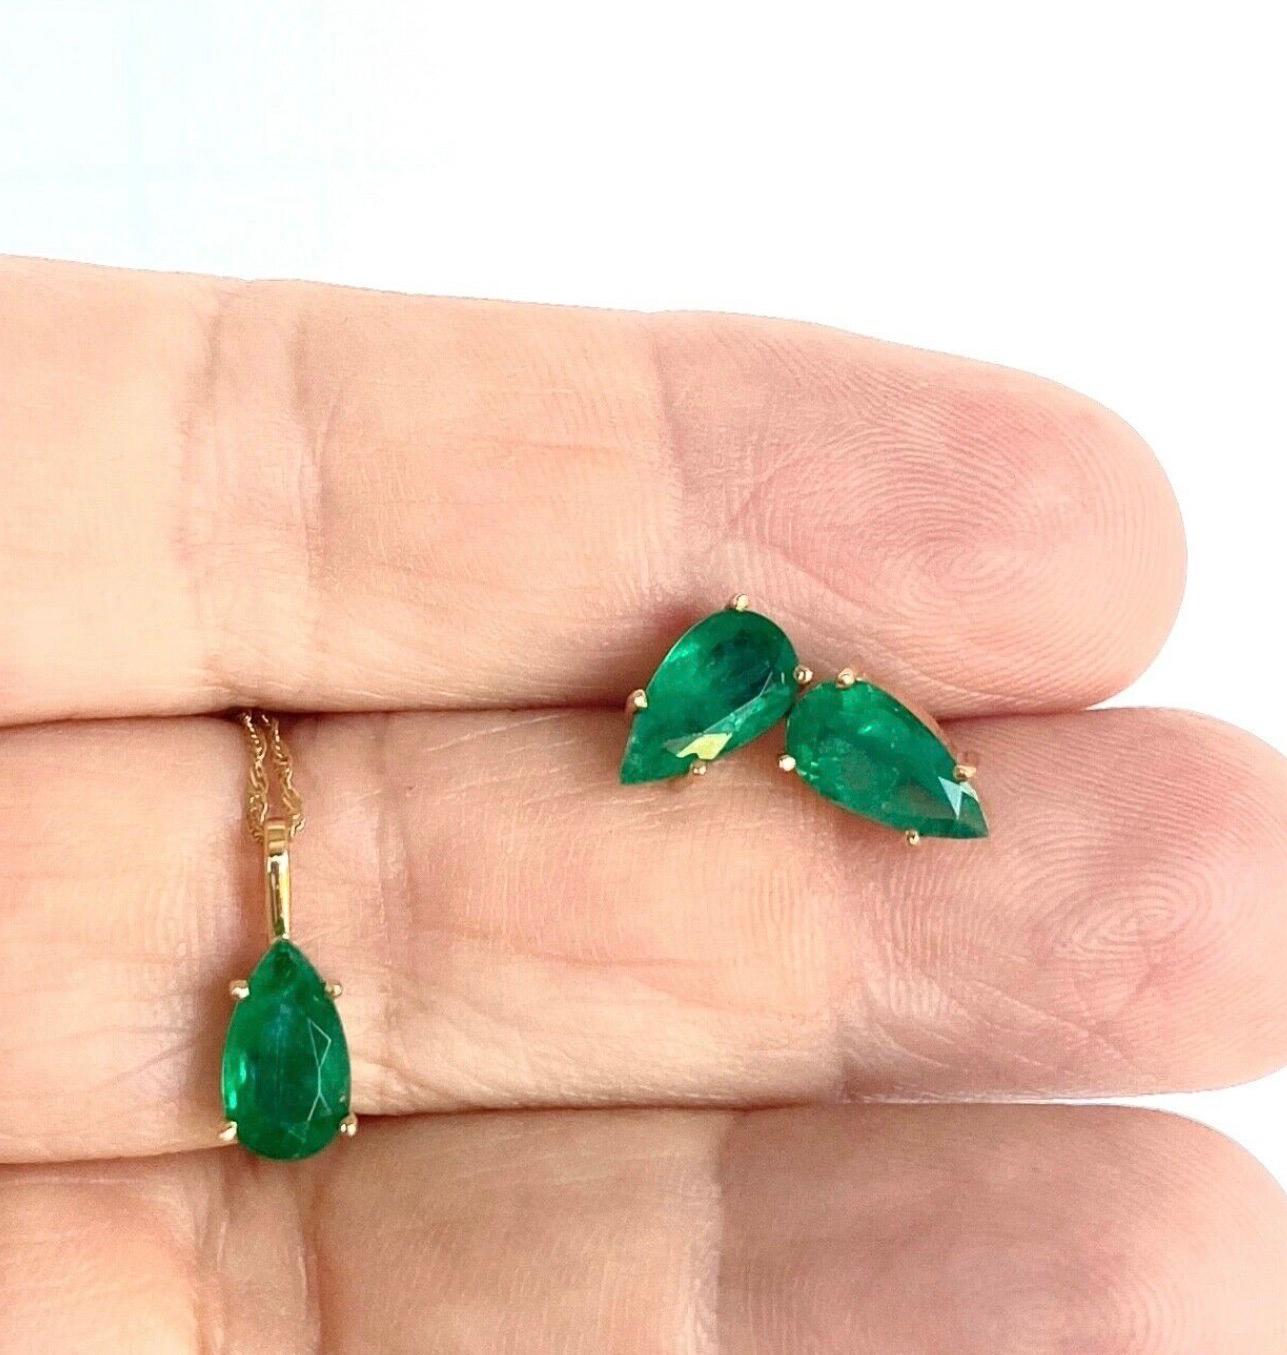 Absolutely gorgeous quality Colombian emeralds set. Pendant, and earrings AAA color and quality Colombian Natural Emeralds Set in 18K Yellow Gold!

Stud Earrings:
Natural AAA Medium Green Emerald
Pear-Cut
Earrings Weight 2.60 carat
Push